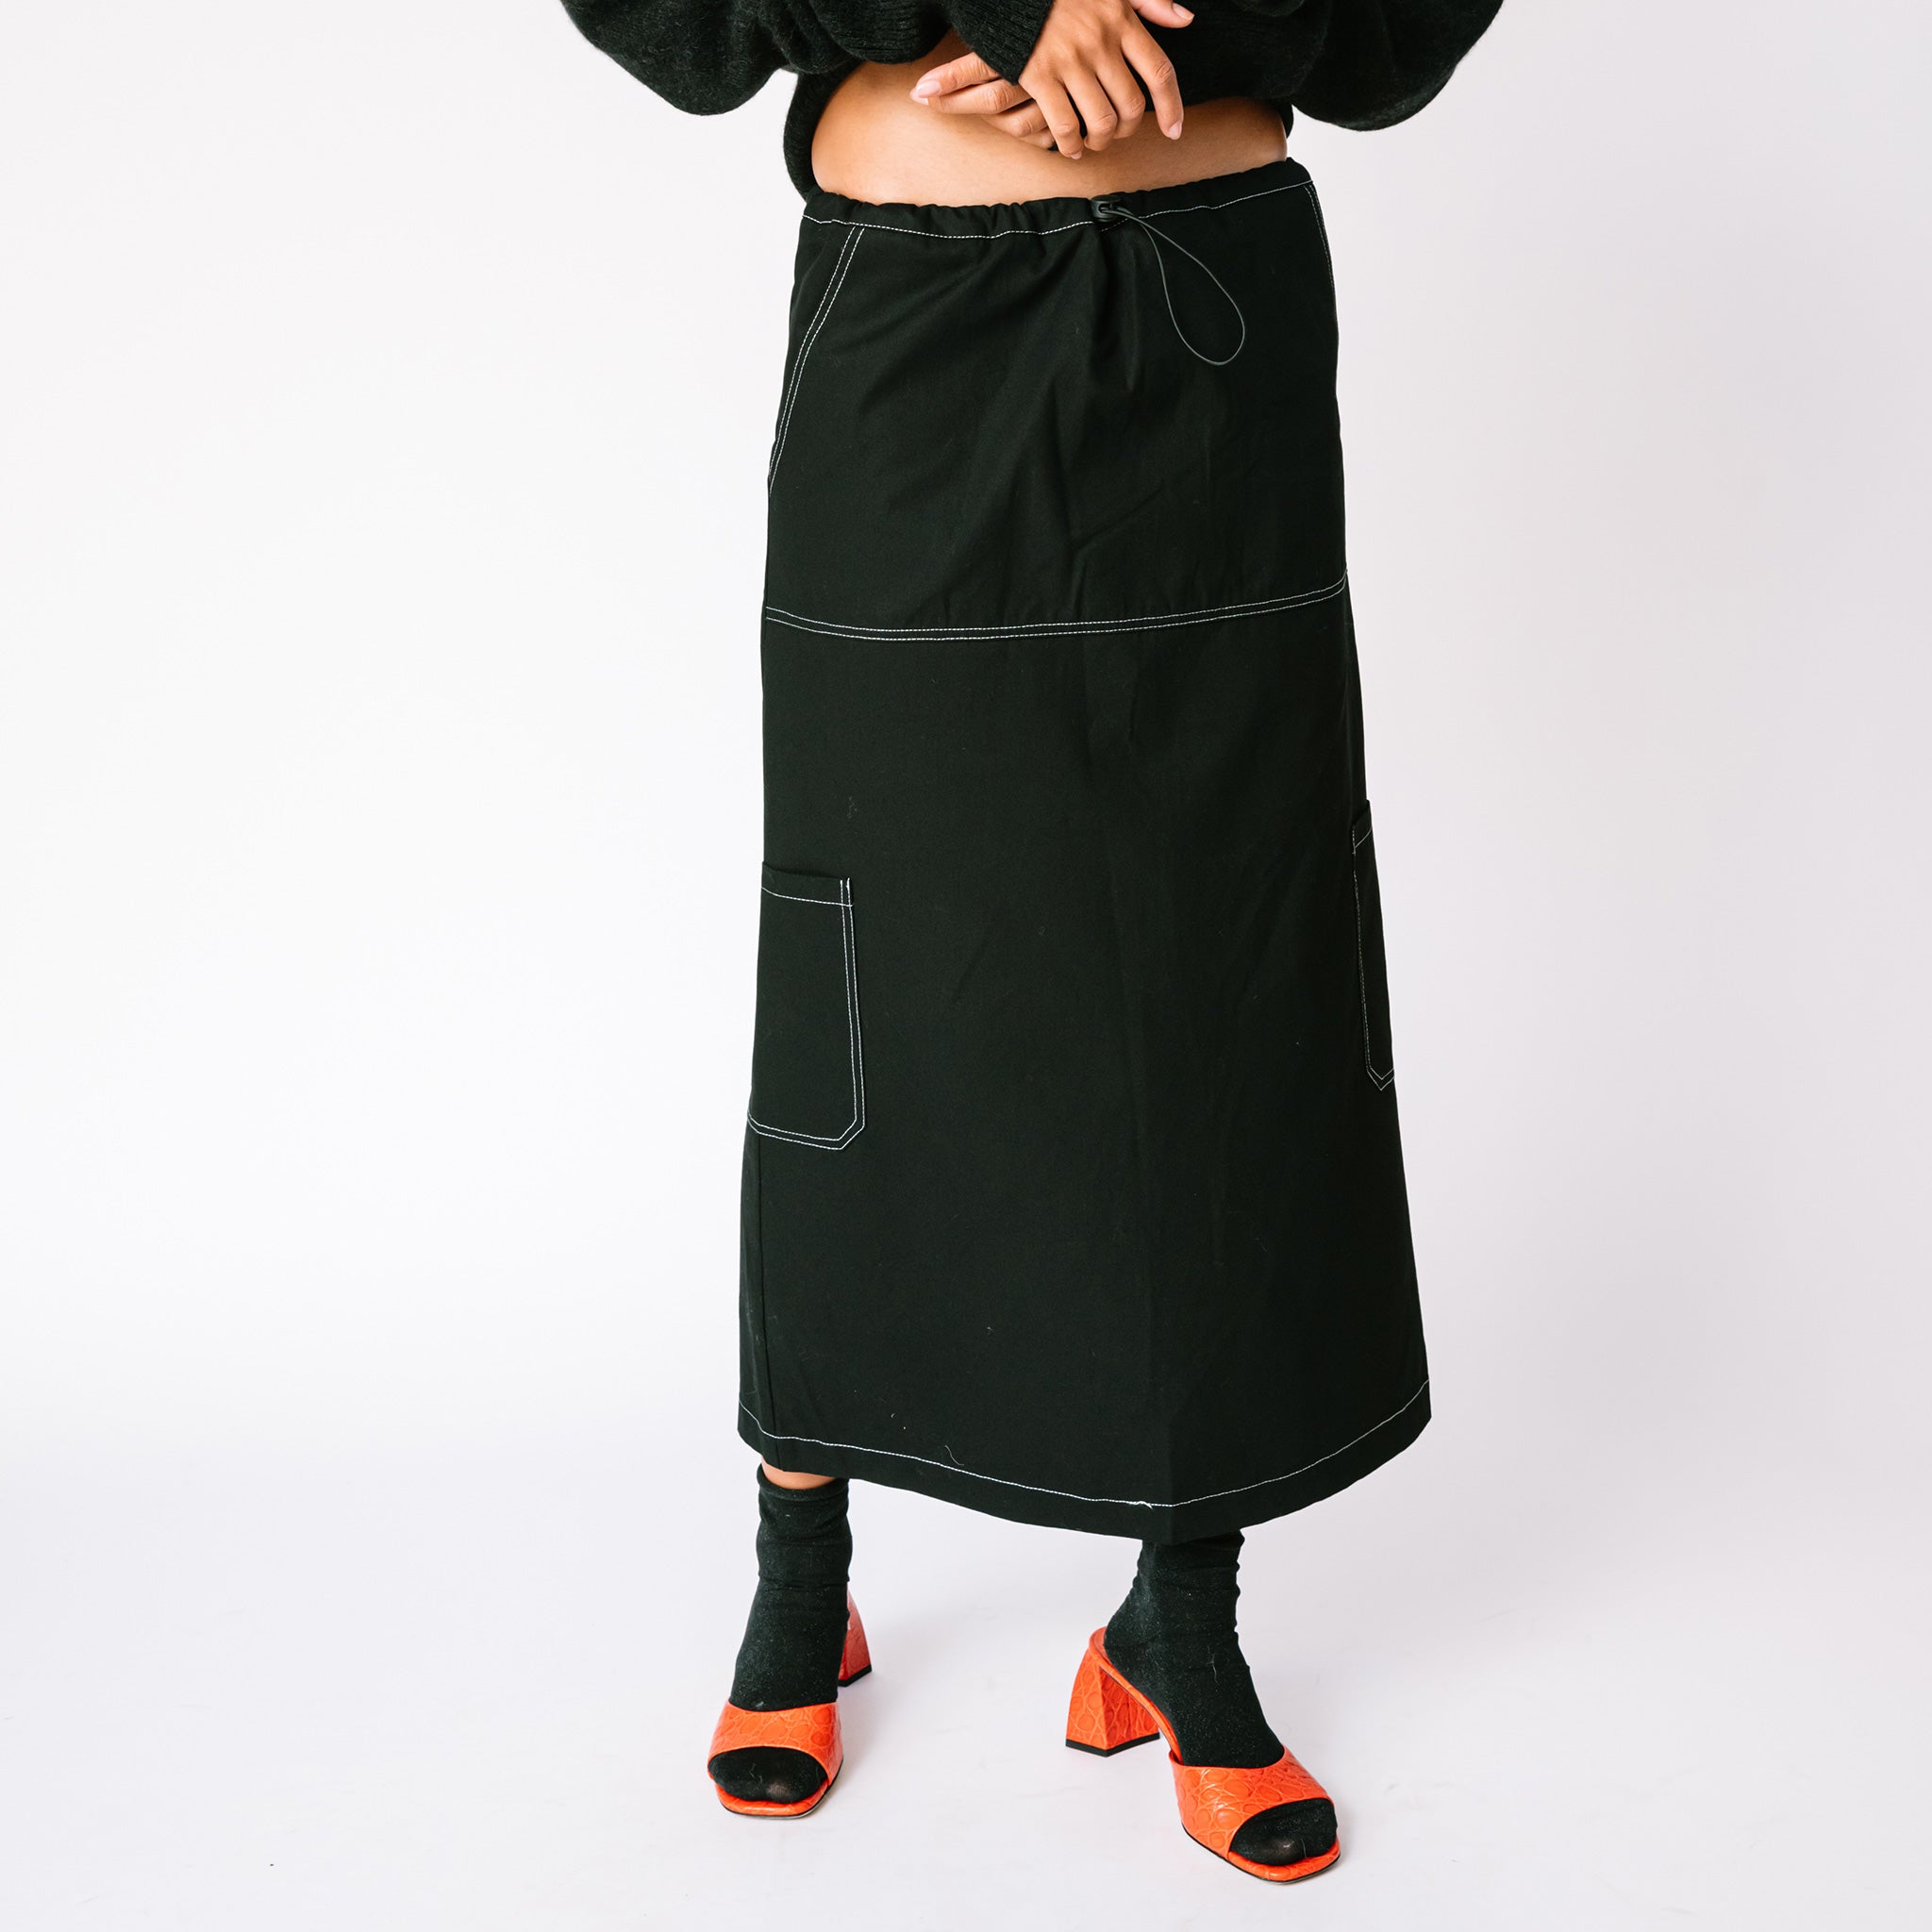 A model wears the Misc Etc long Contrast Stitch Cargo Skirt in black - paired with black socks and red heels.